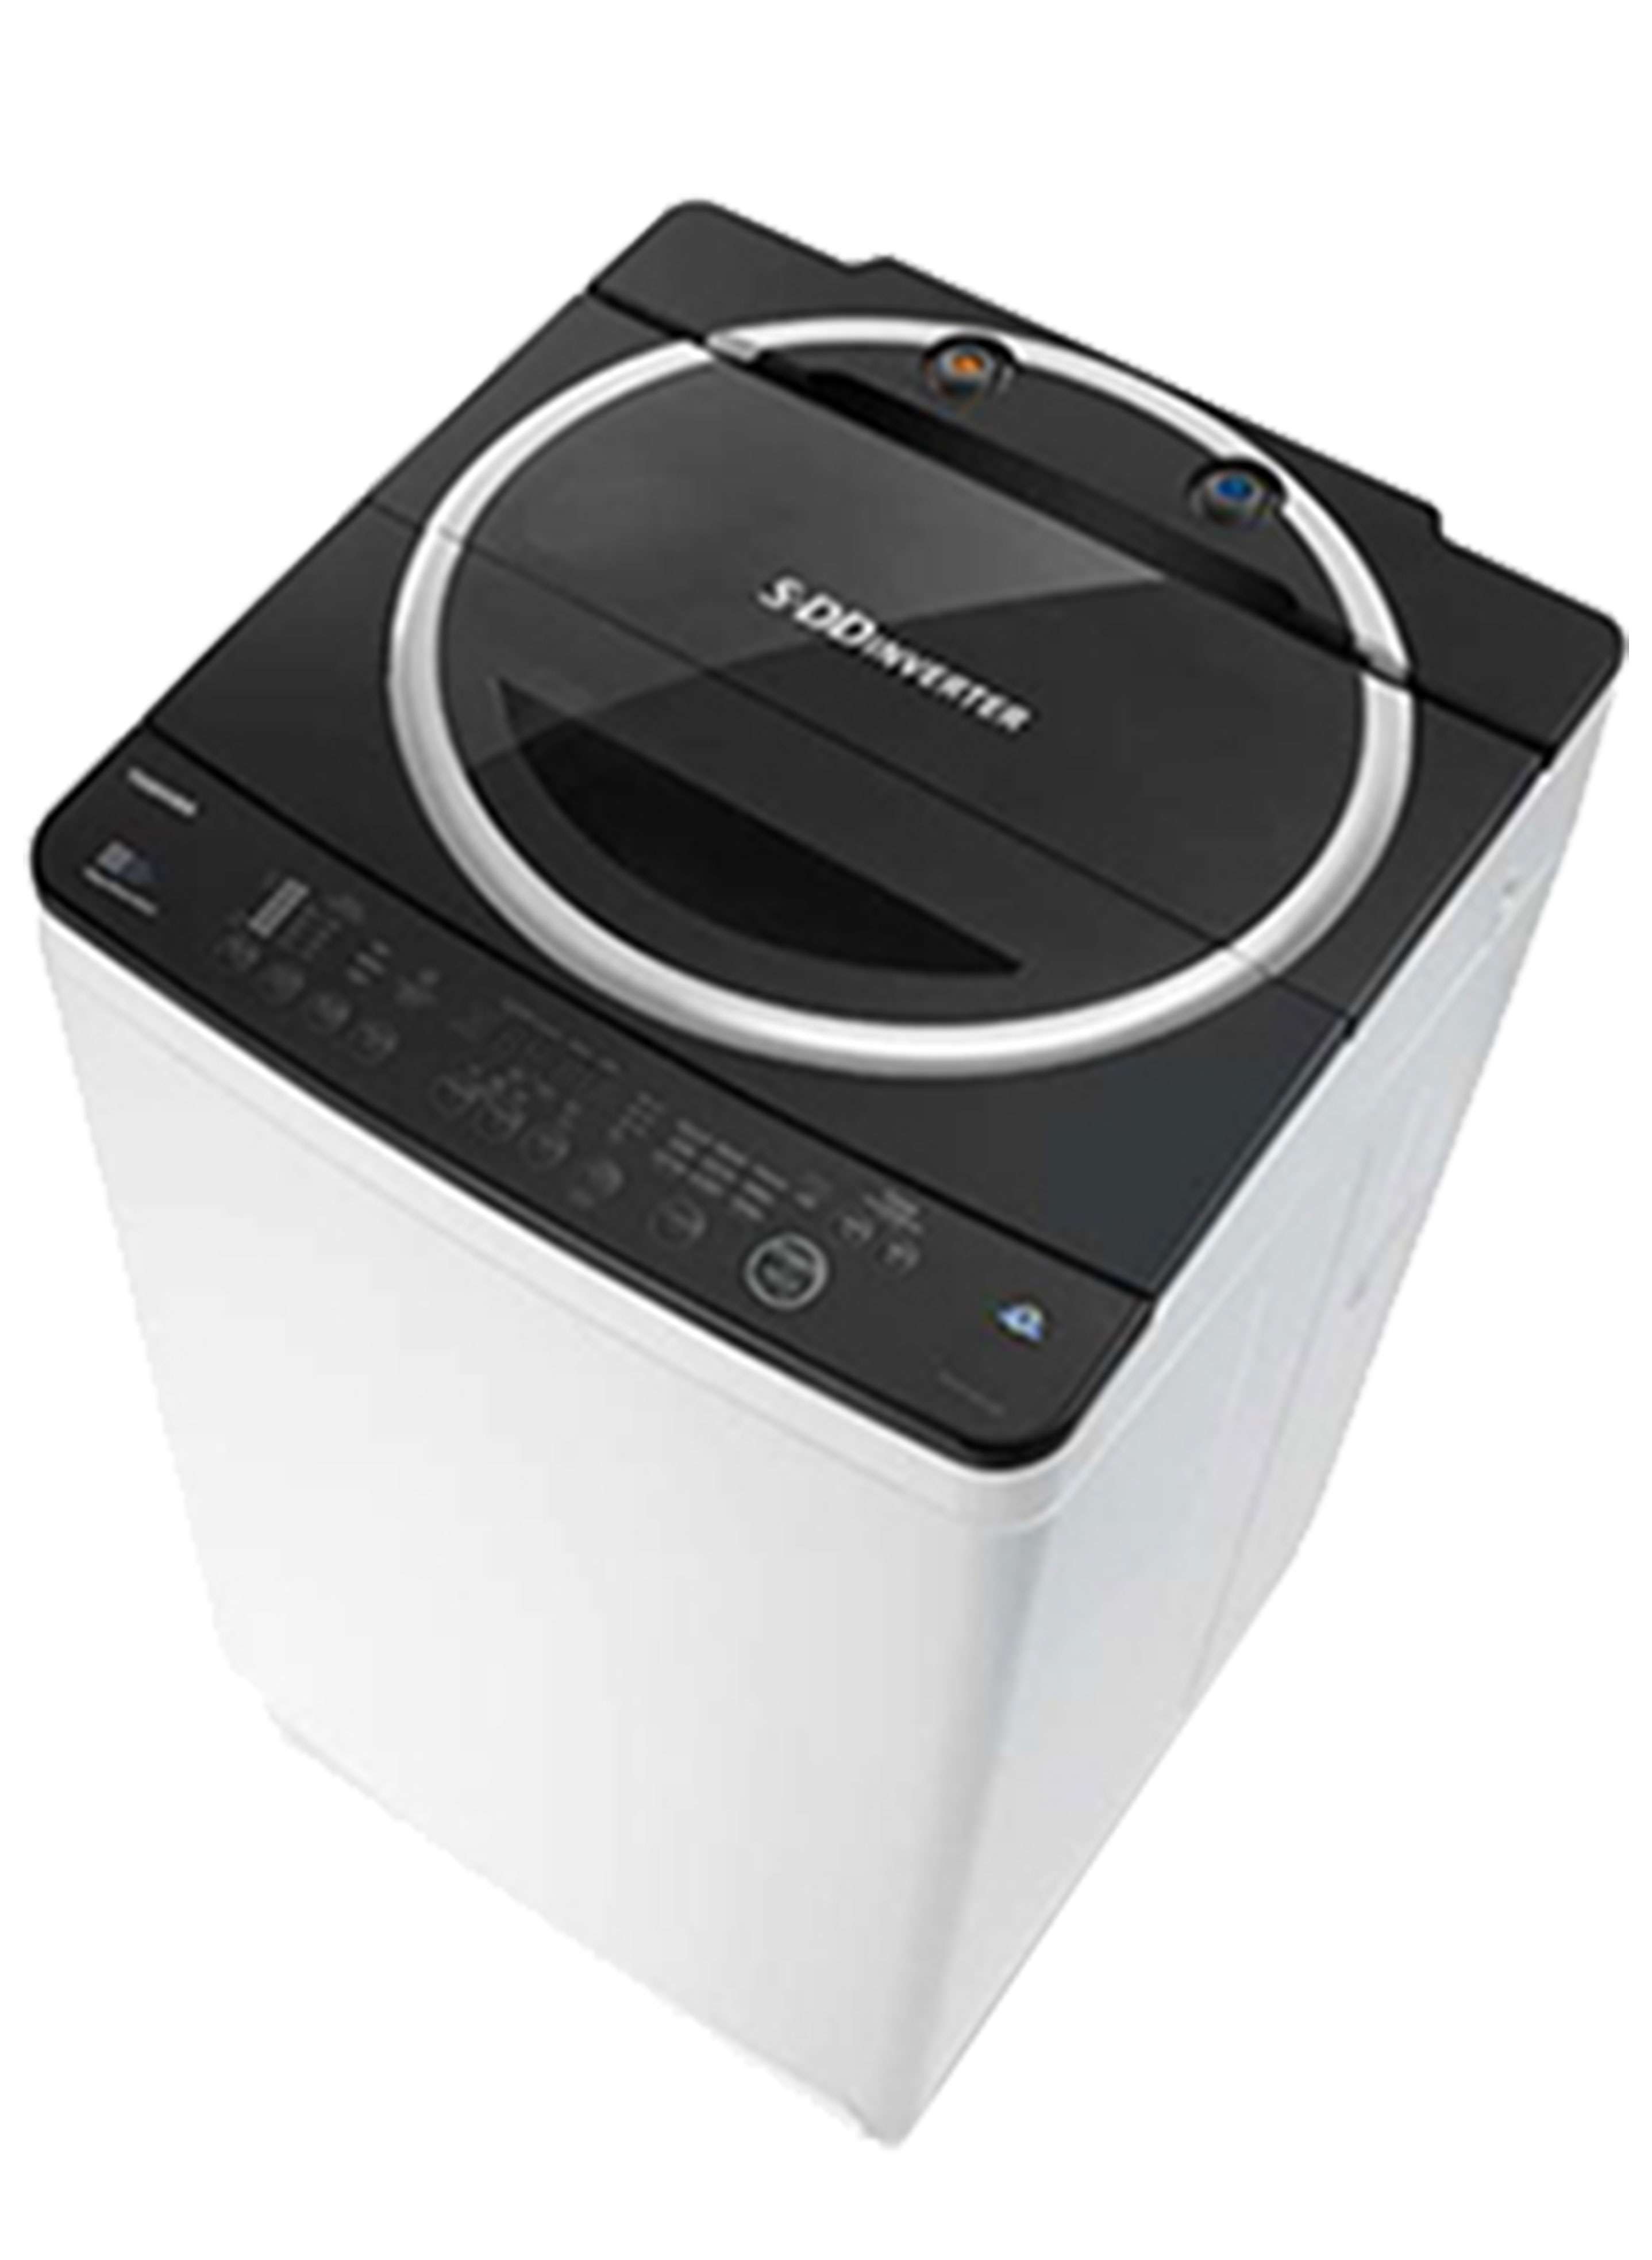 11 KG. TOP LOAD WASHER WITH A HYGIENE DRUM